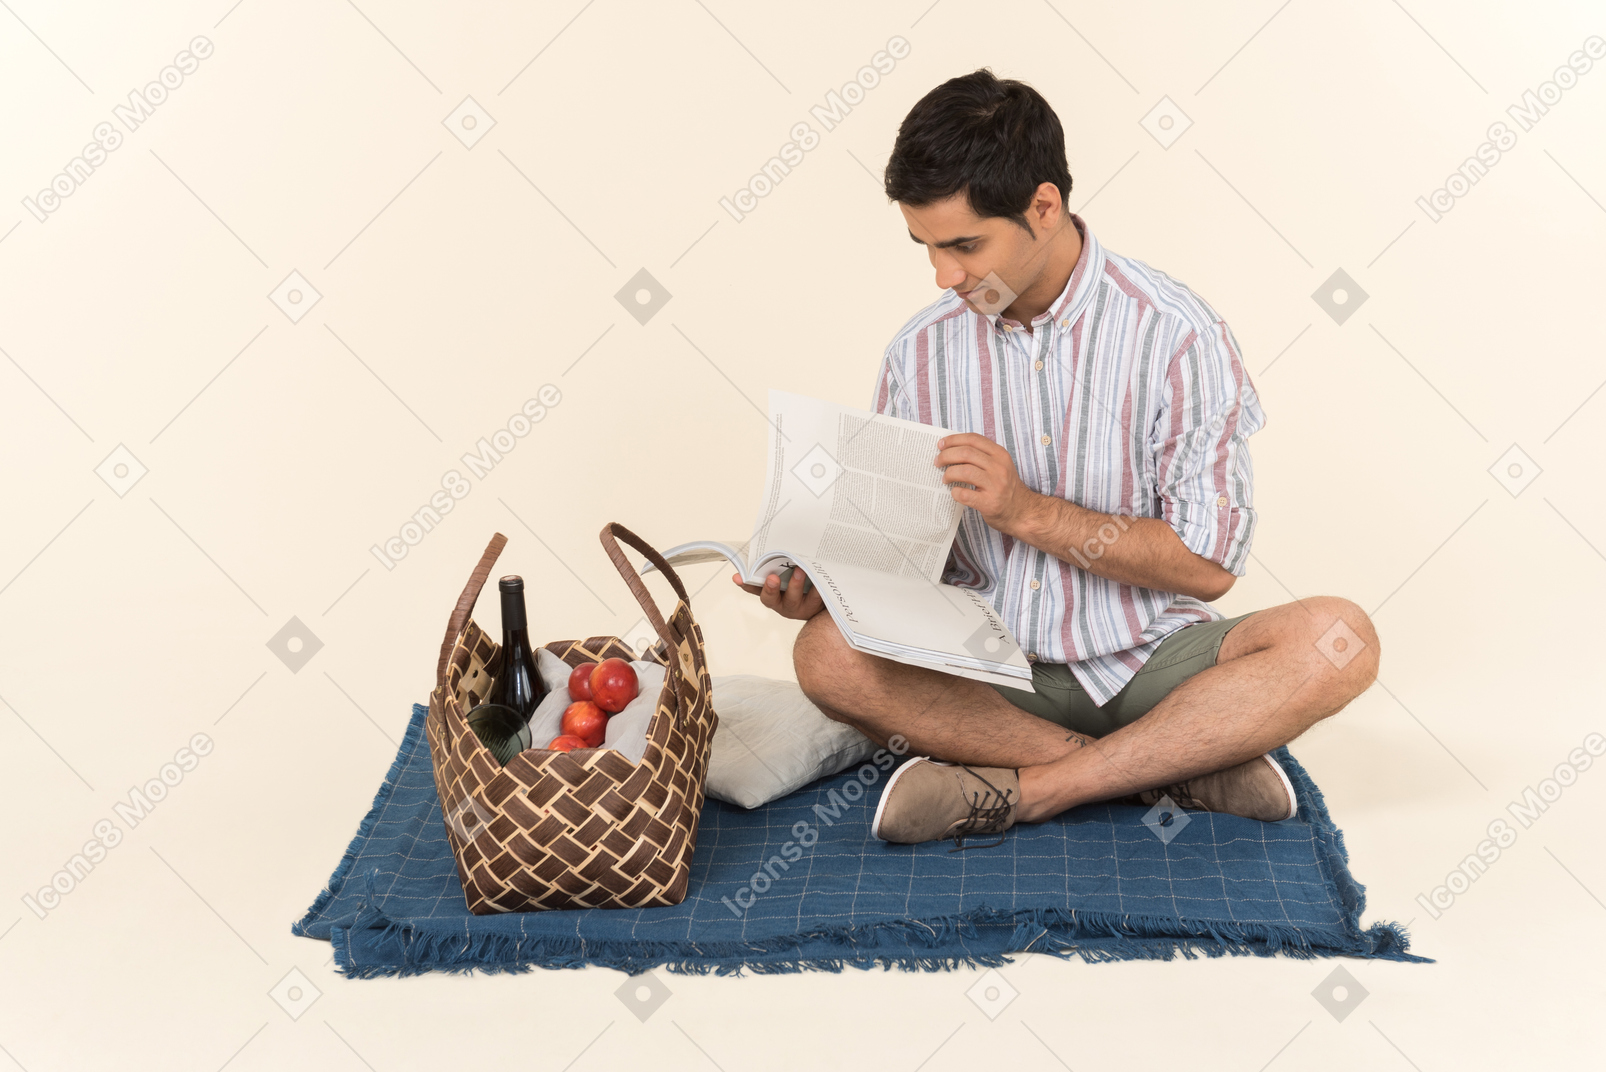 Young caucasian guy sitting on blanket and holding magazine opened